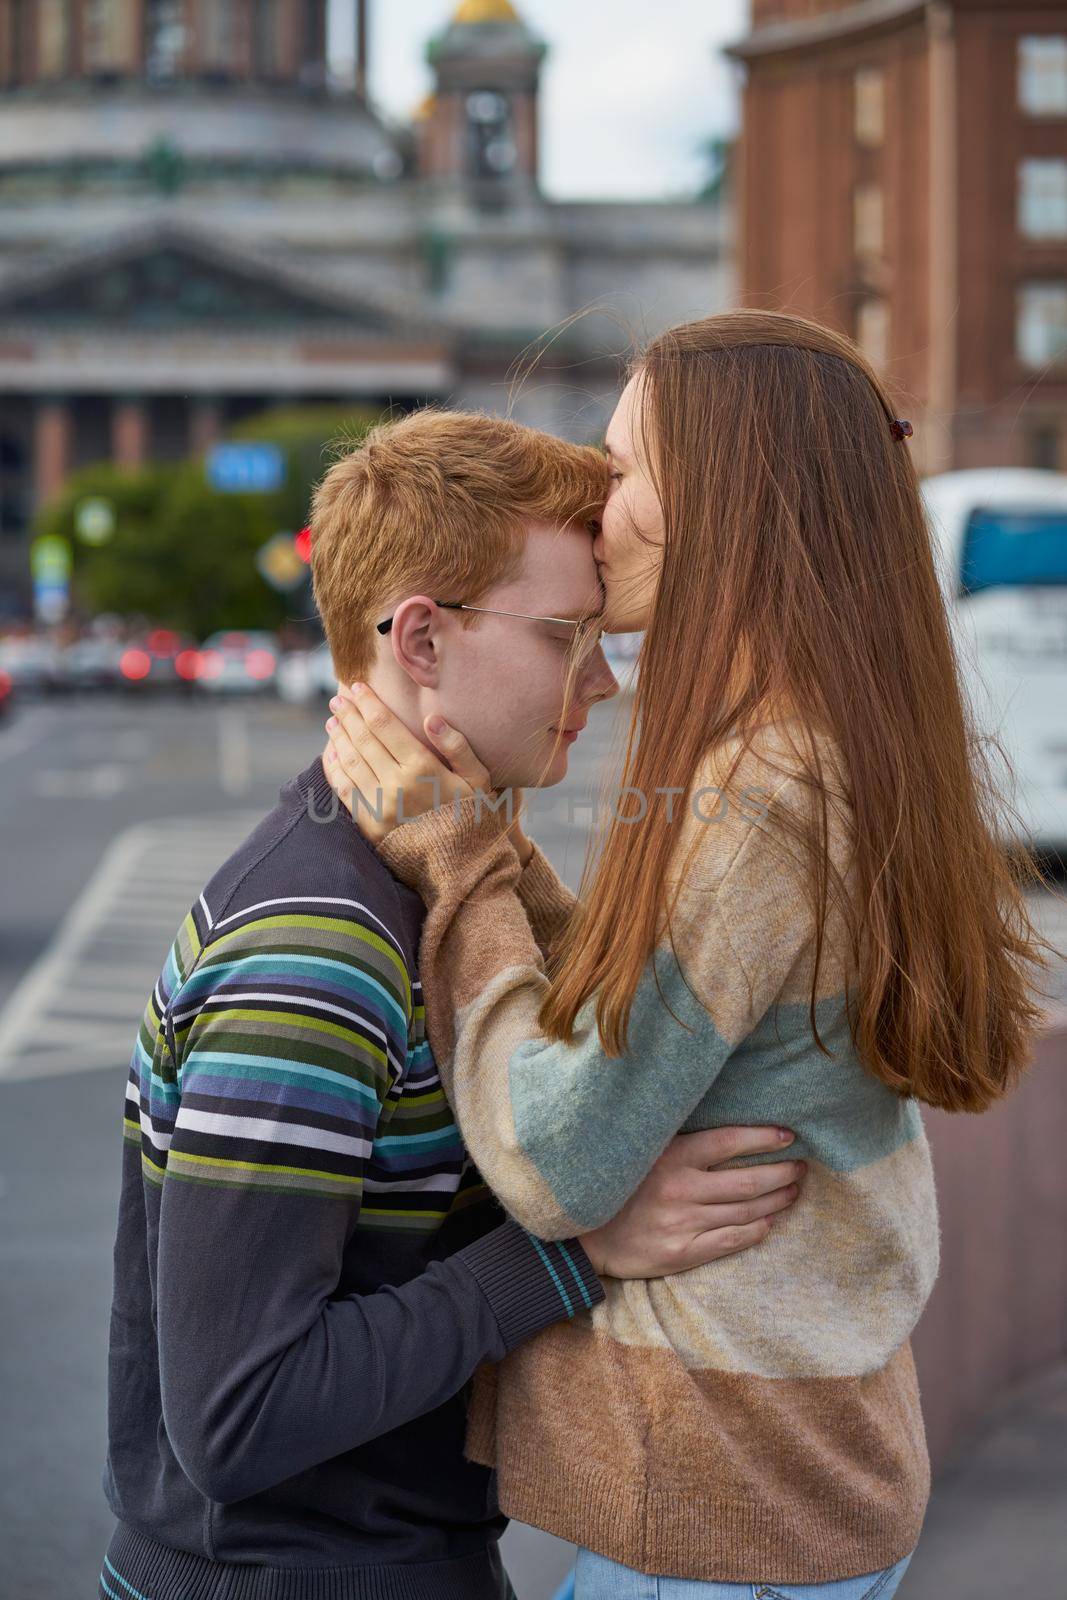 red-haired woman kisses a man on the top of her head, a woman with long dark thick hair in a sweater soothes and comforts a boy, vertical